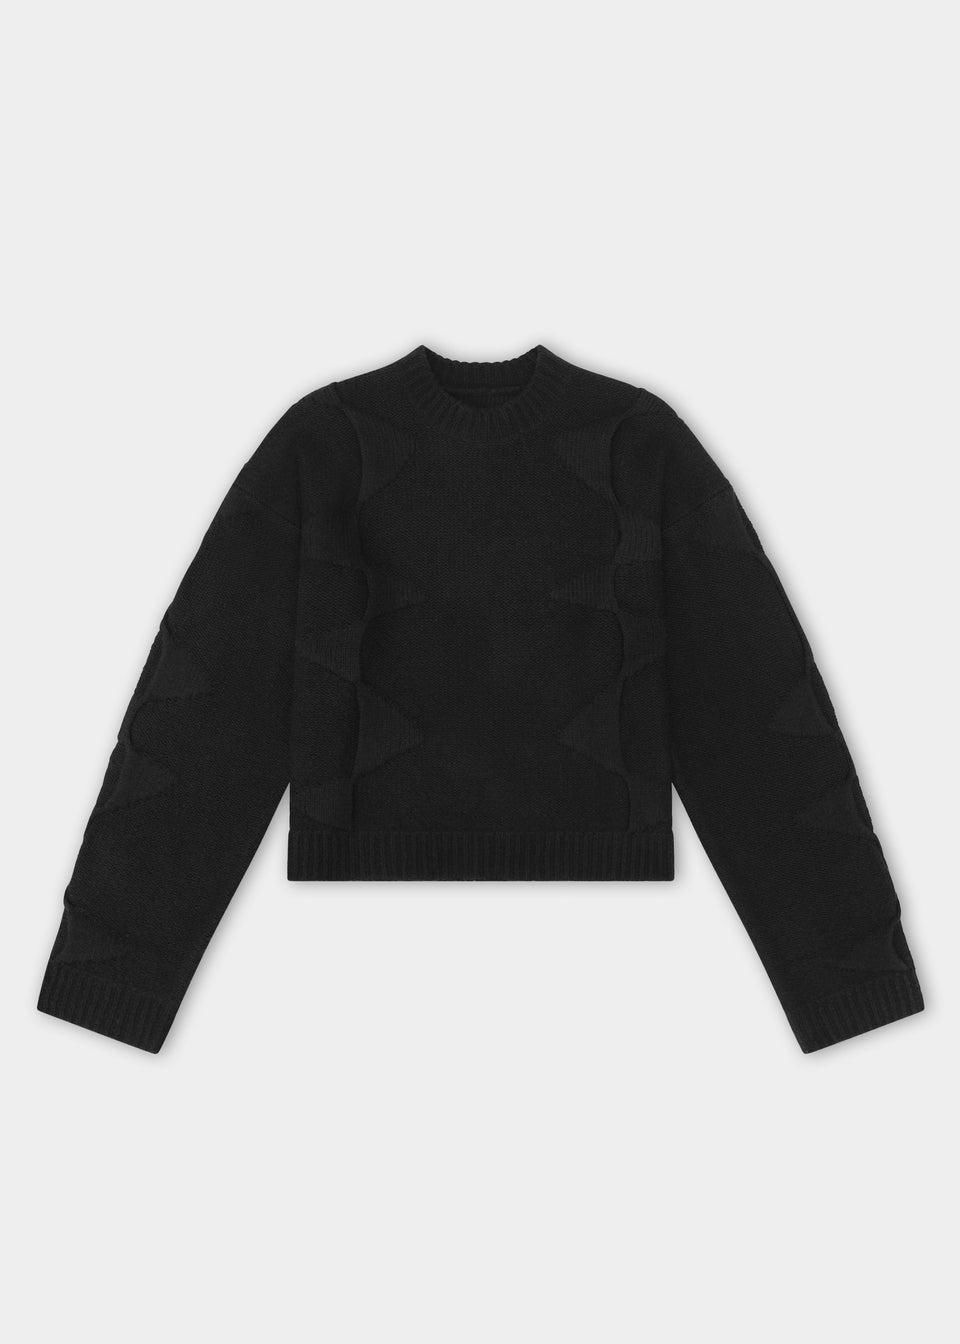 CROPPED SPIRAL KNIT by HELIOT EMIL